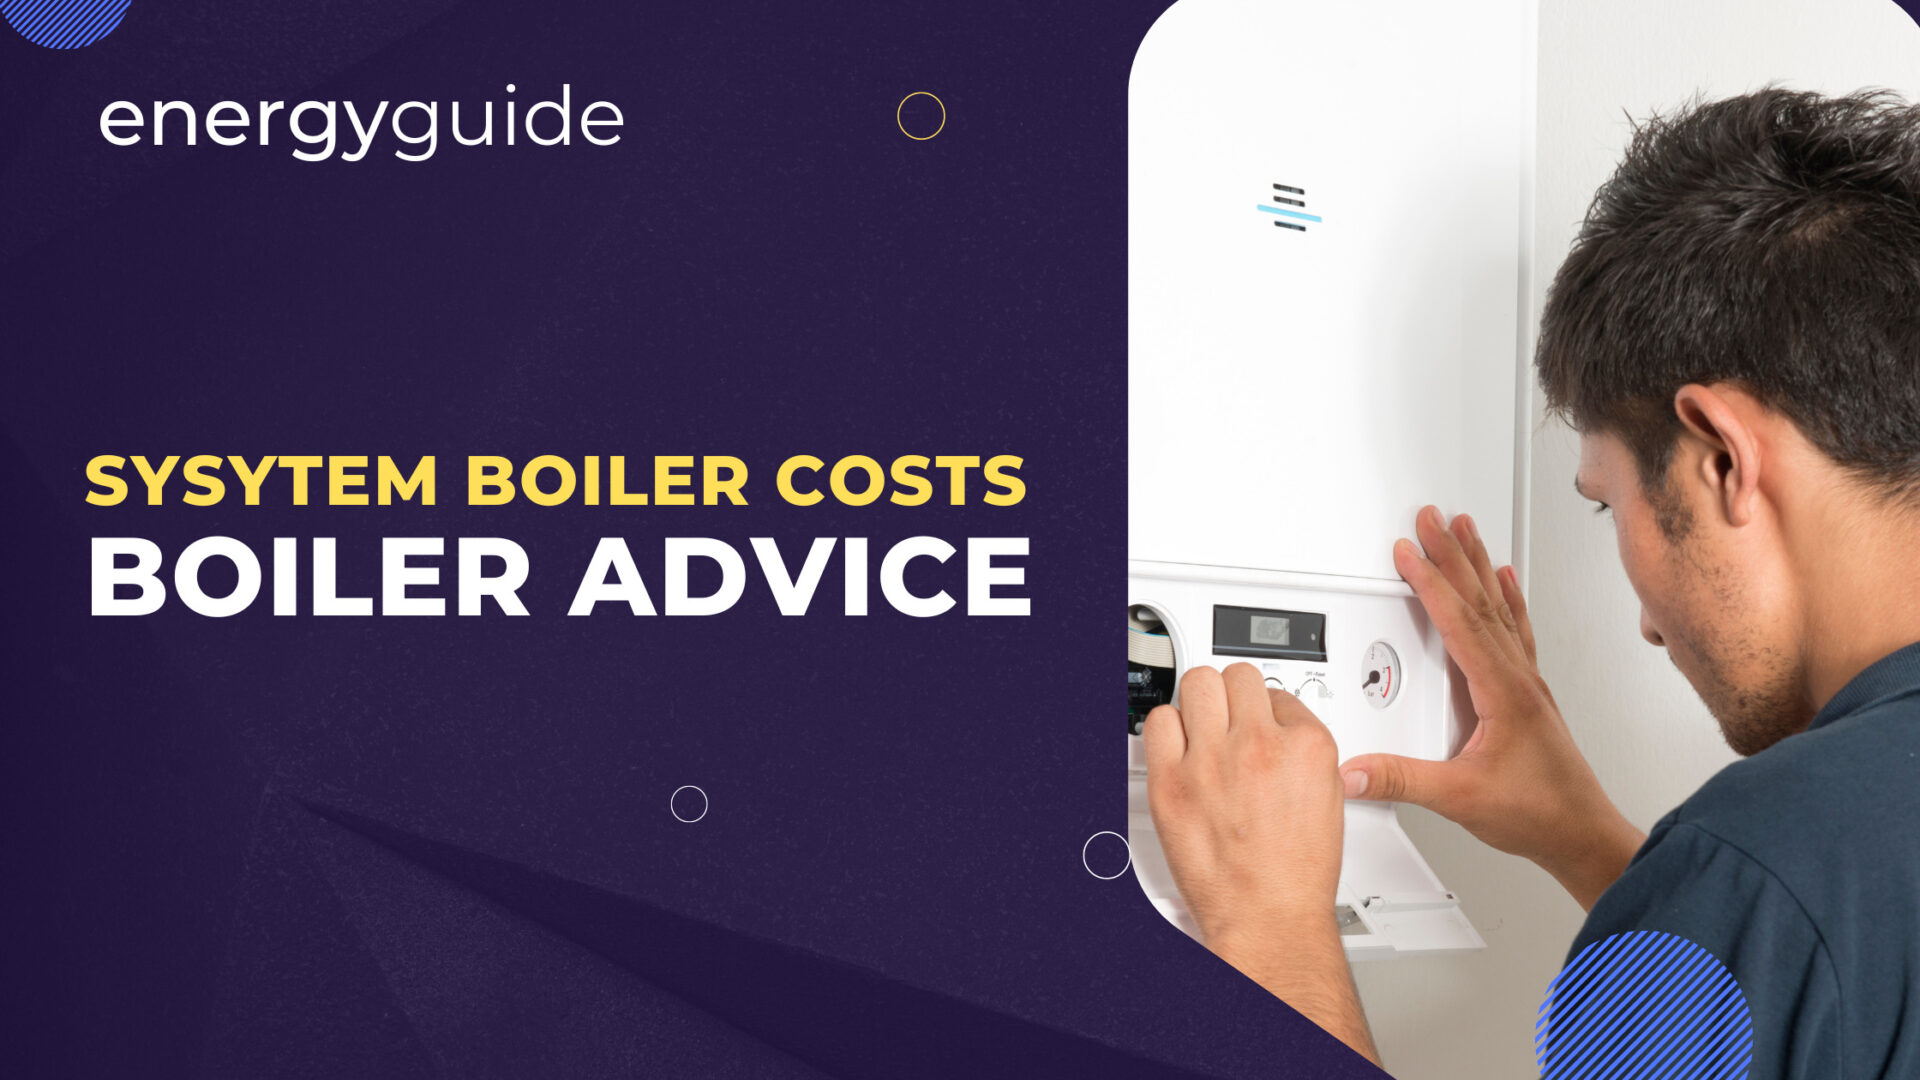 System boiler costs